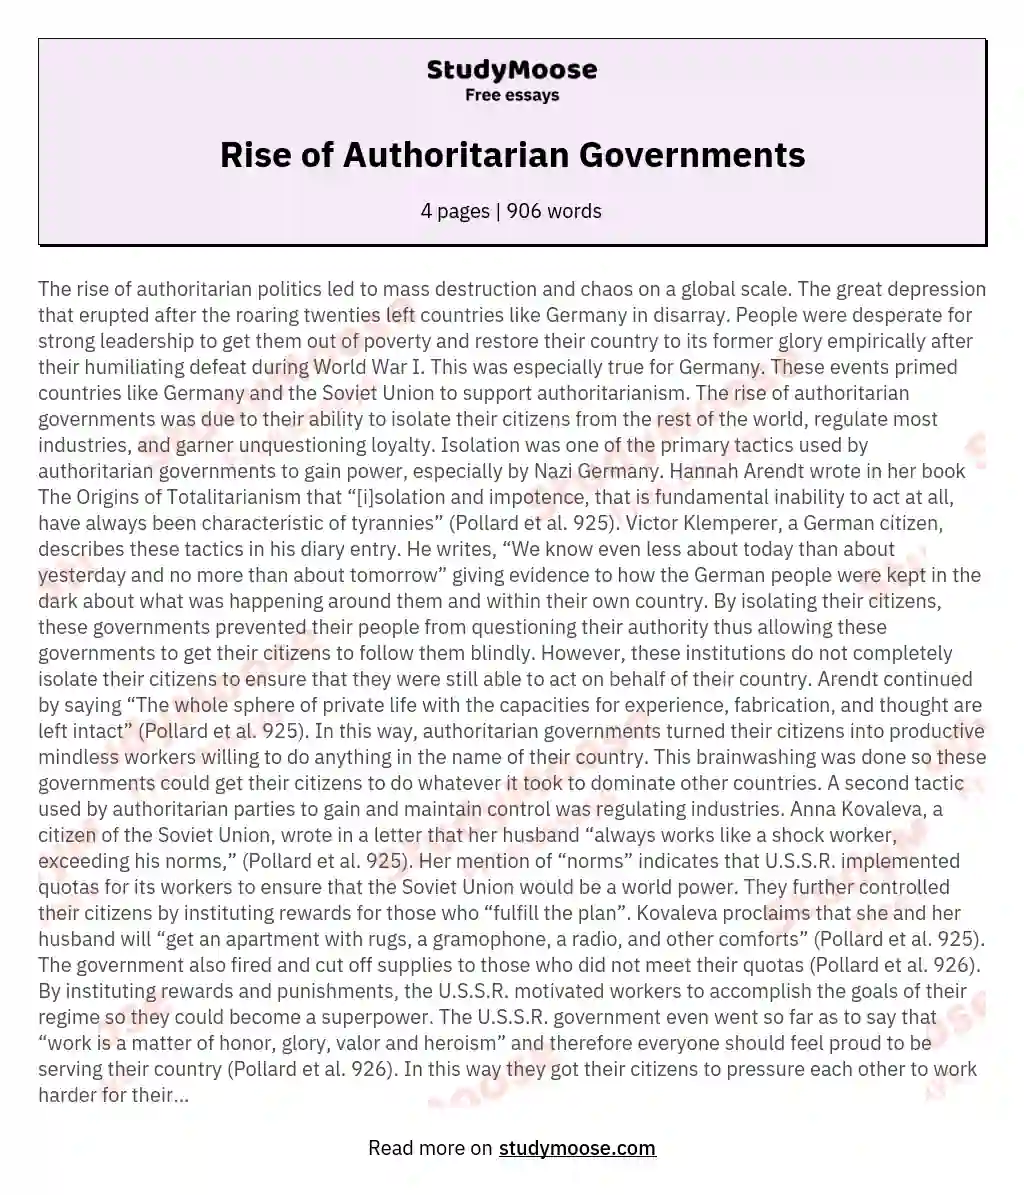 Rise of Authoritarian Governments essay